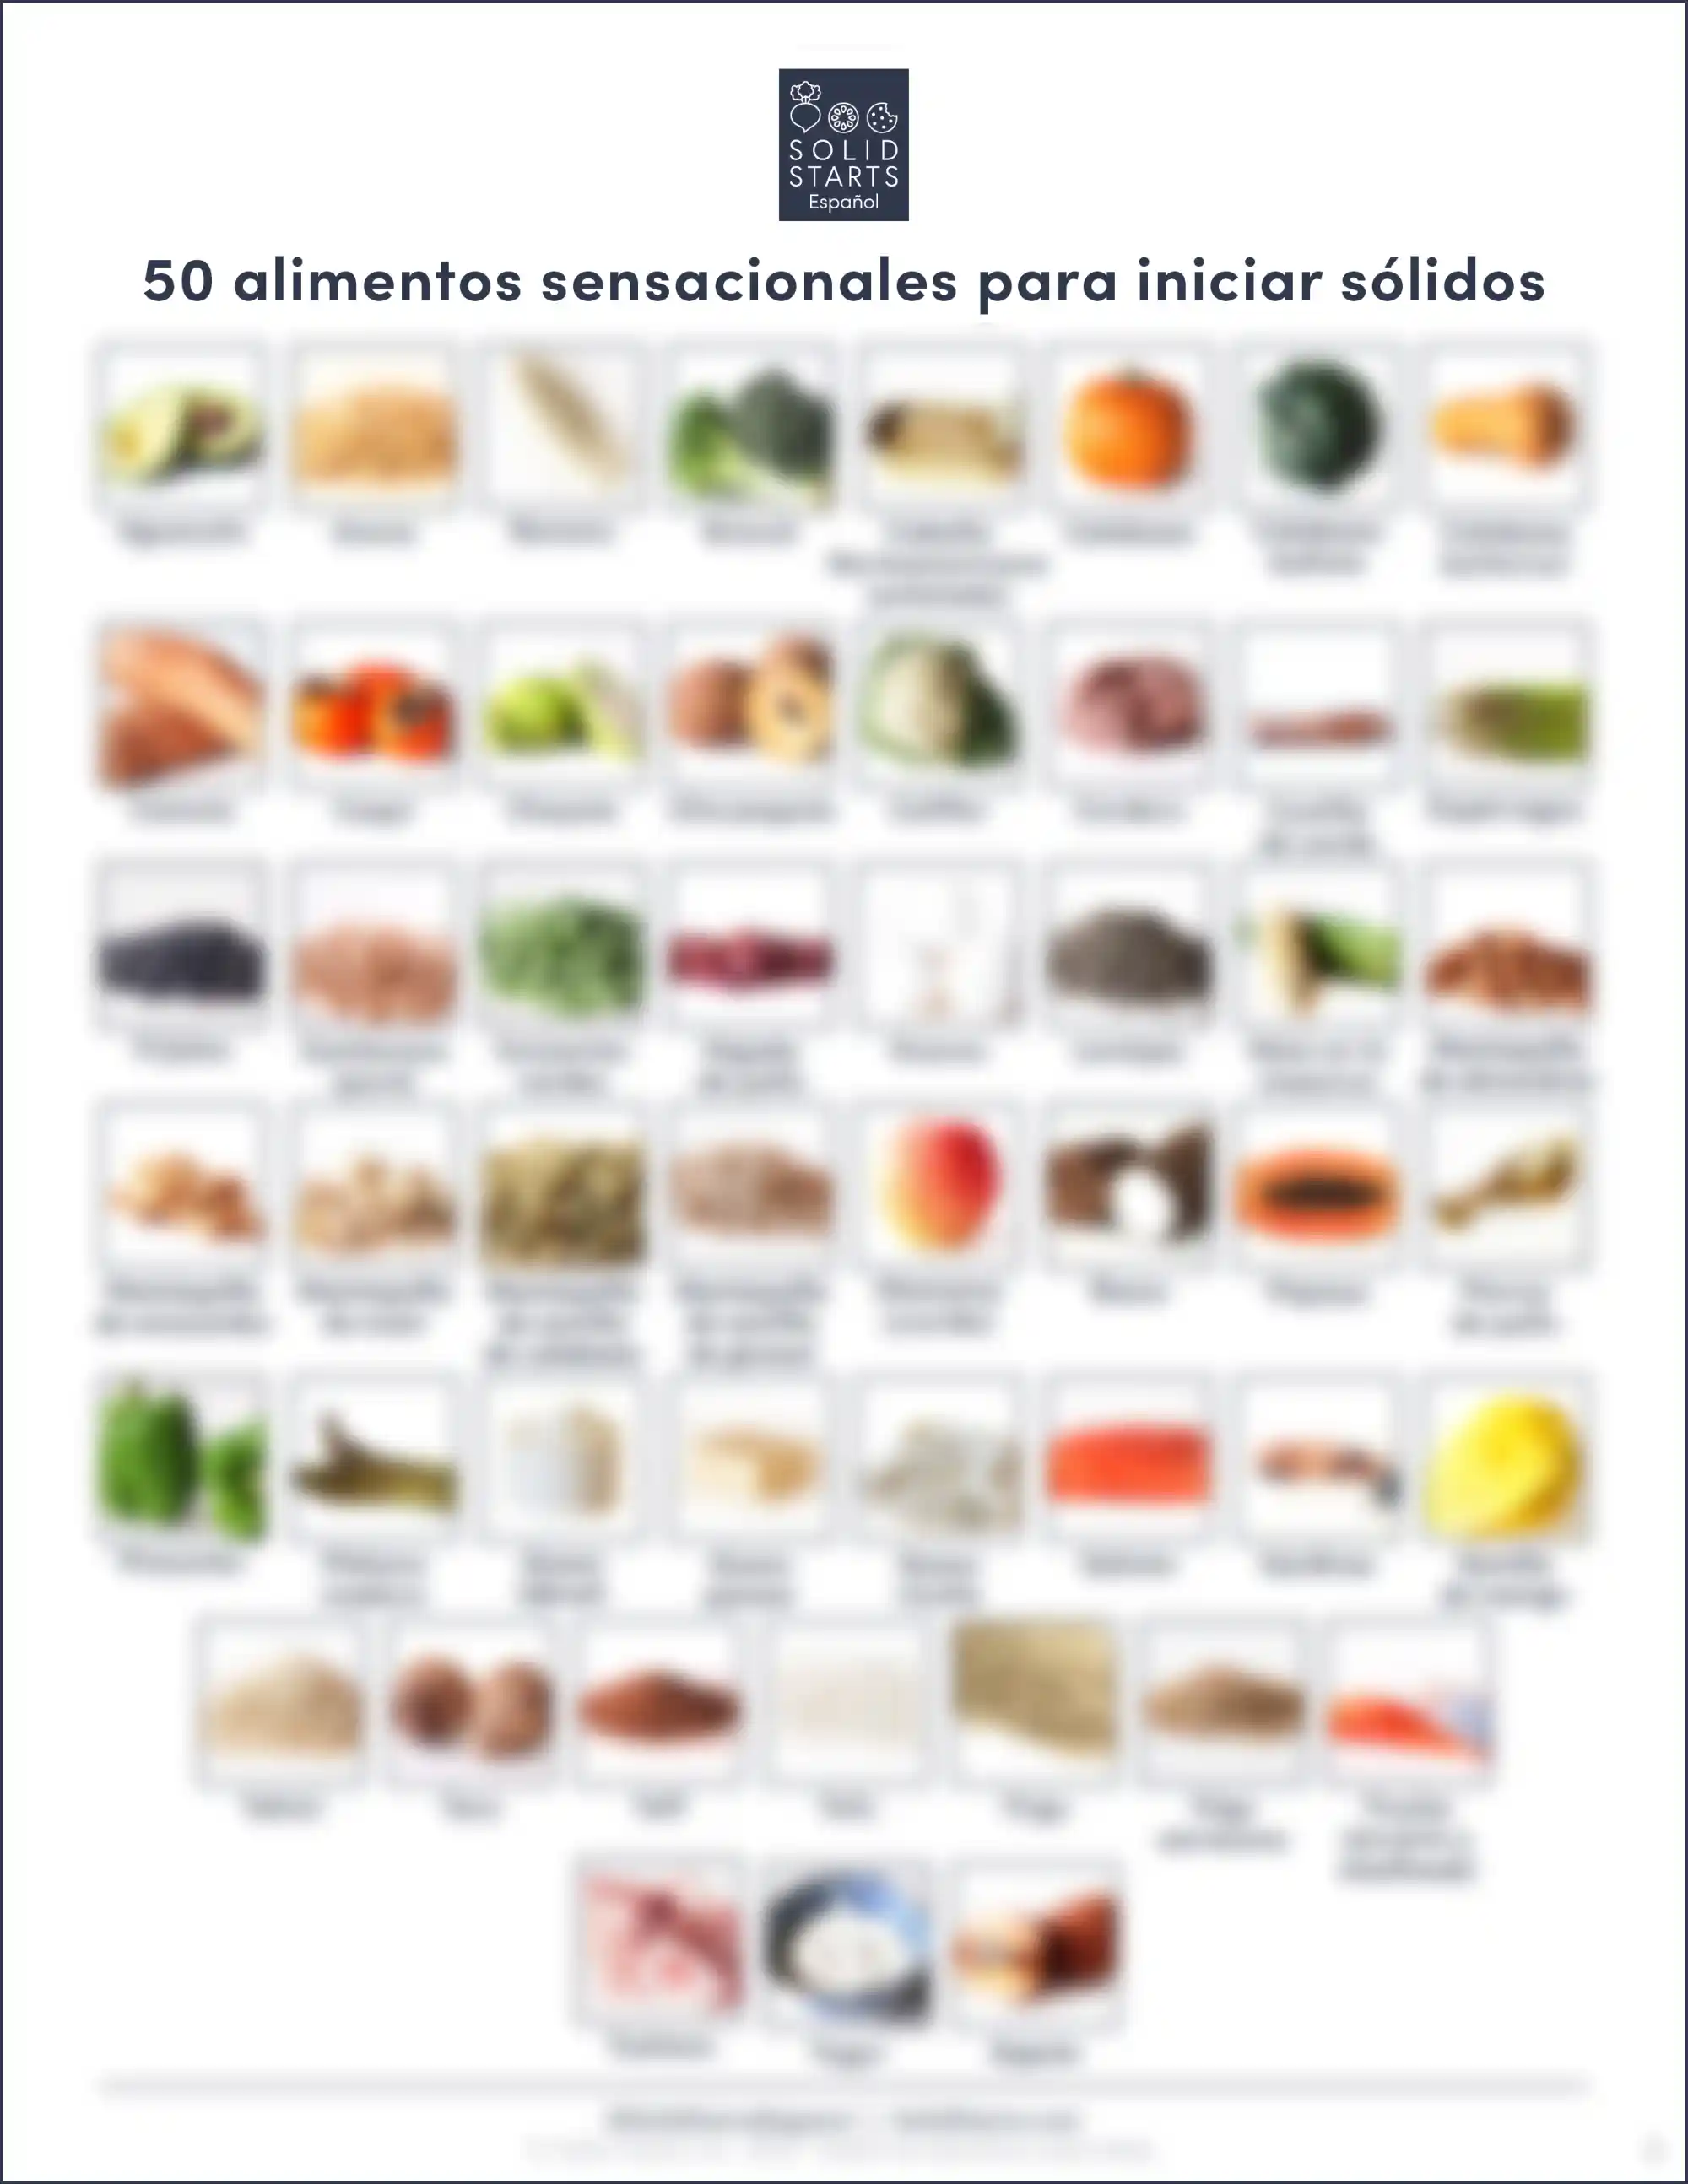 a blurred image of food pictures with descriptions for each for babies starting solid food